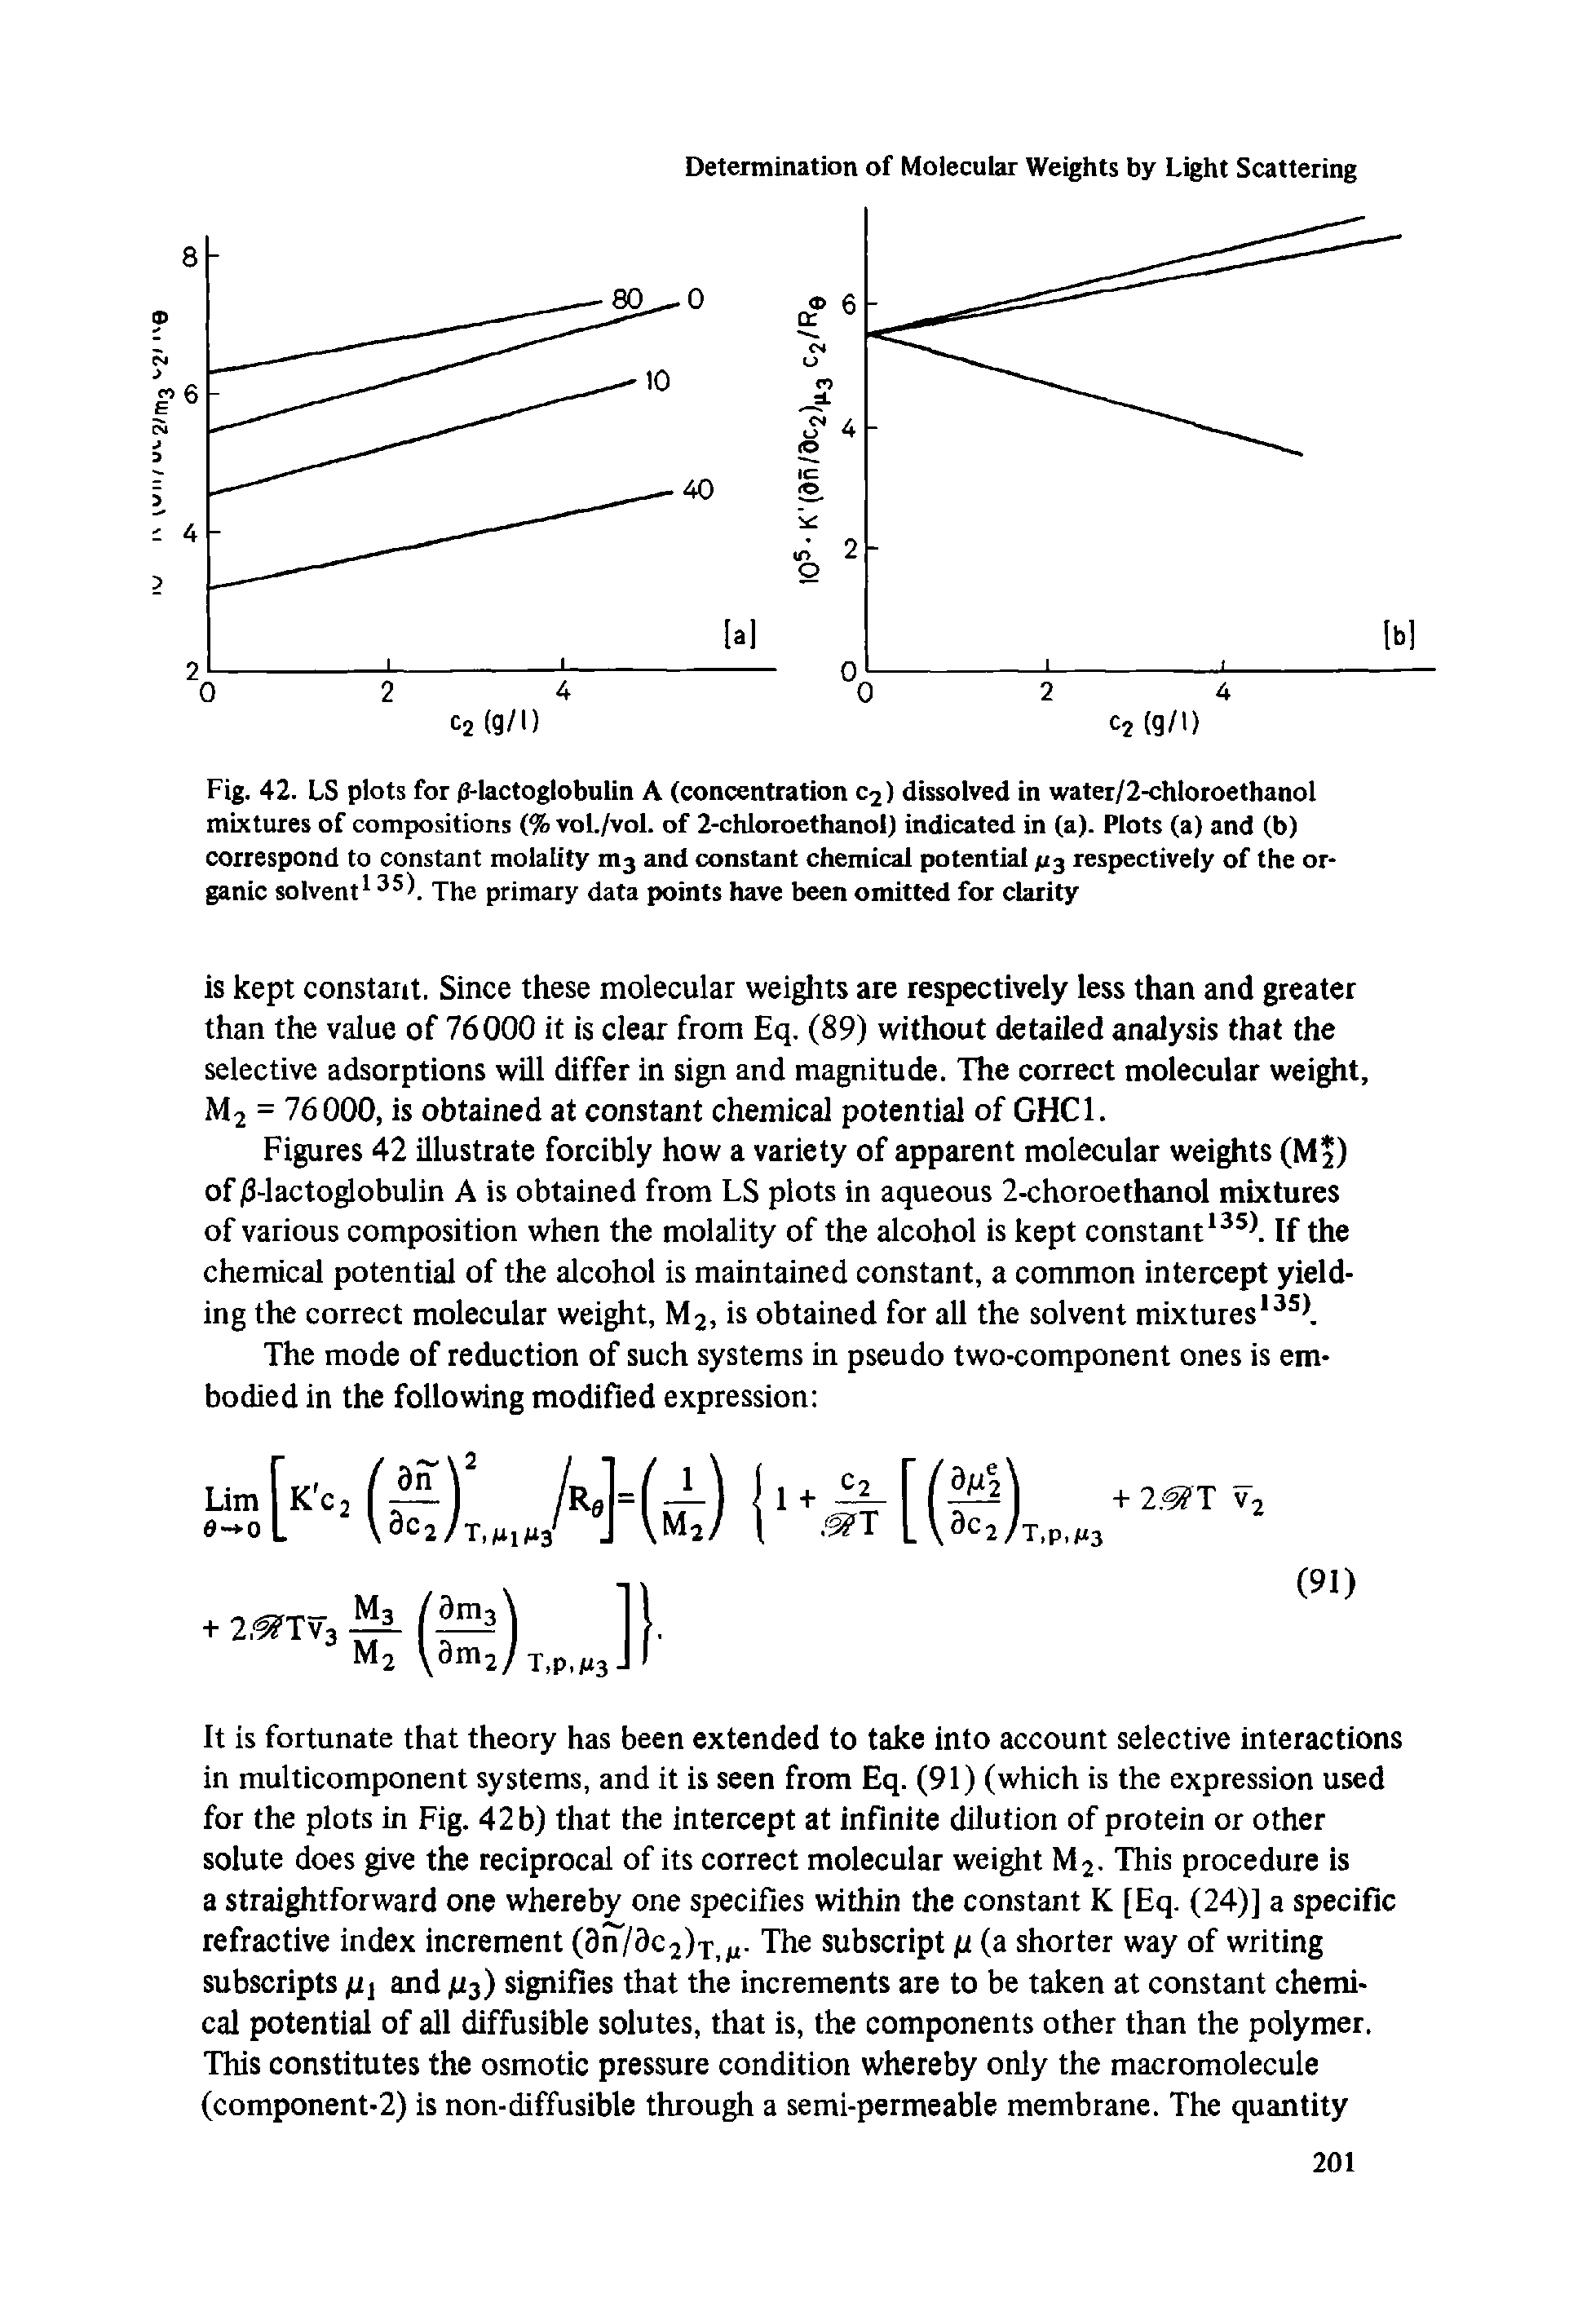 Fig. 42. LS plots for 0-lactoglobulin A (concentration c2) dissolved in water/2-chloroethanol mixtures of compositions (% voL/vol. of 2-chloroethanol) indicated in (a). Plots (a) and (b) correspond to constant molality m3 and constant chemical potential JU3 respectively of the organic solvent135 The primary data points have been omitted for clarity...